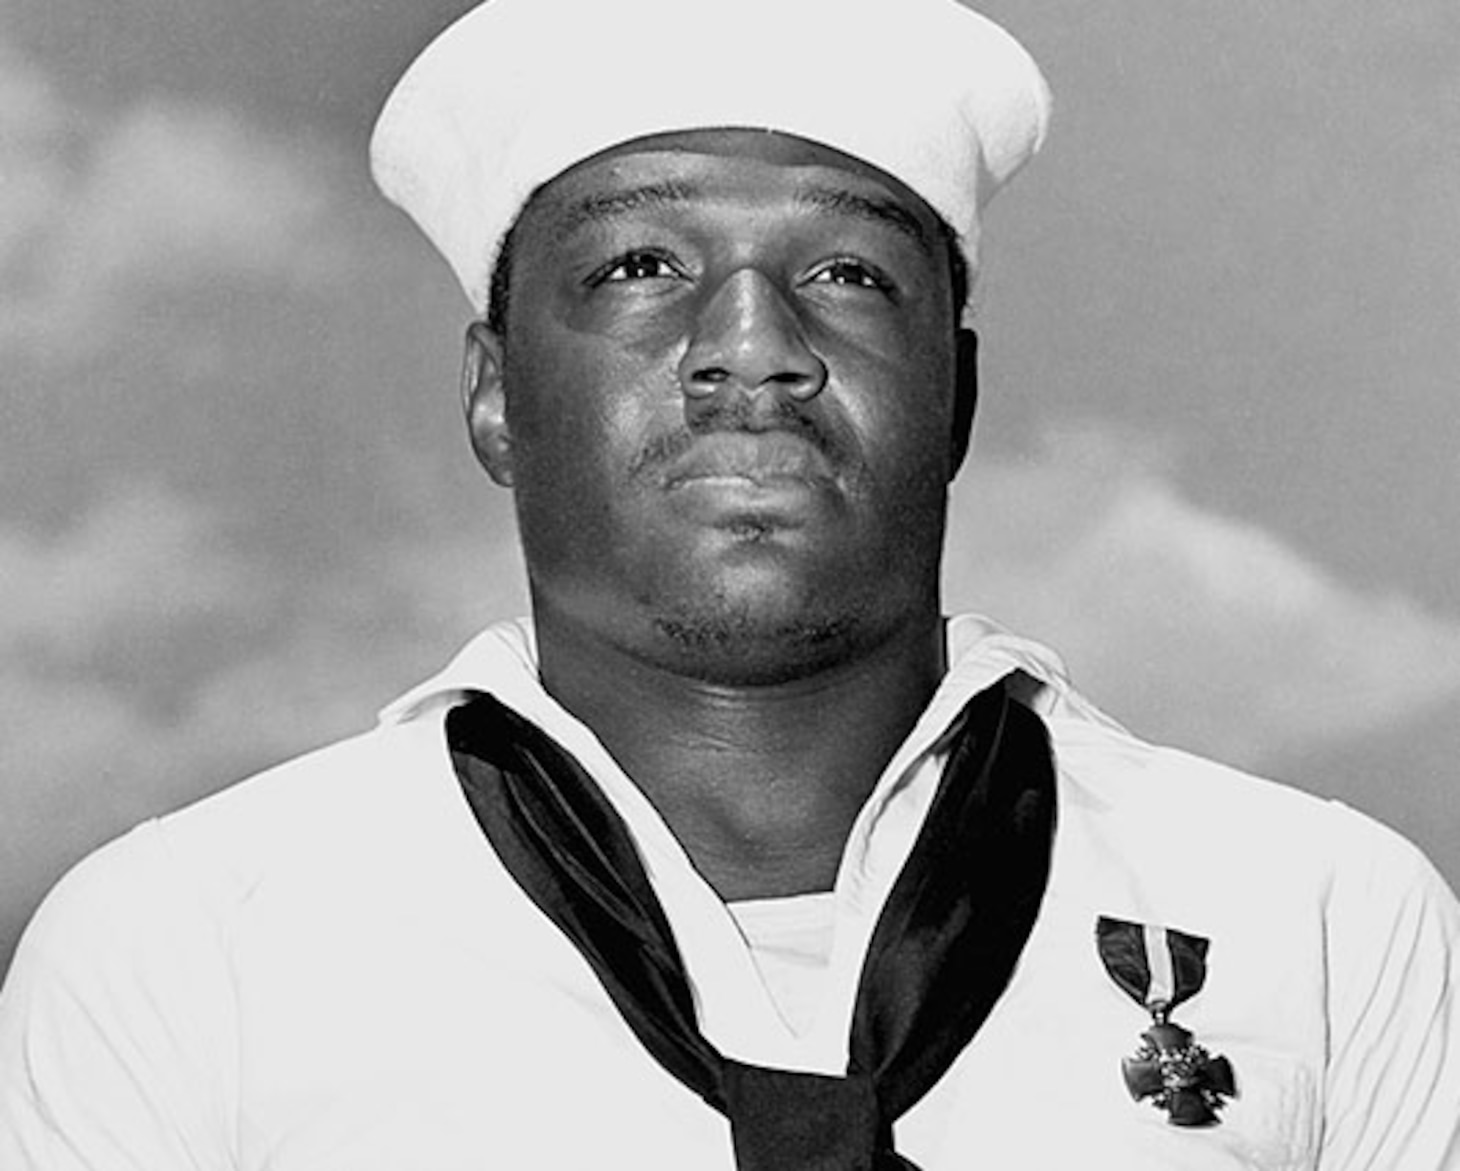 Black and white photo of African American Sailor in dress whites uniform.